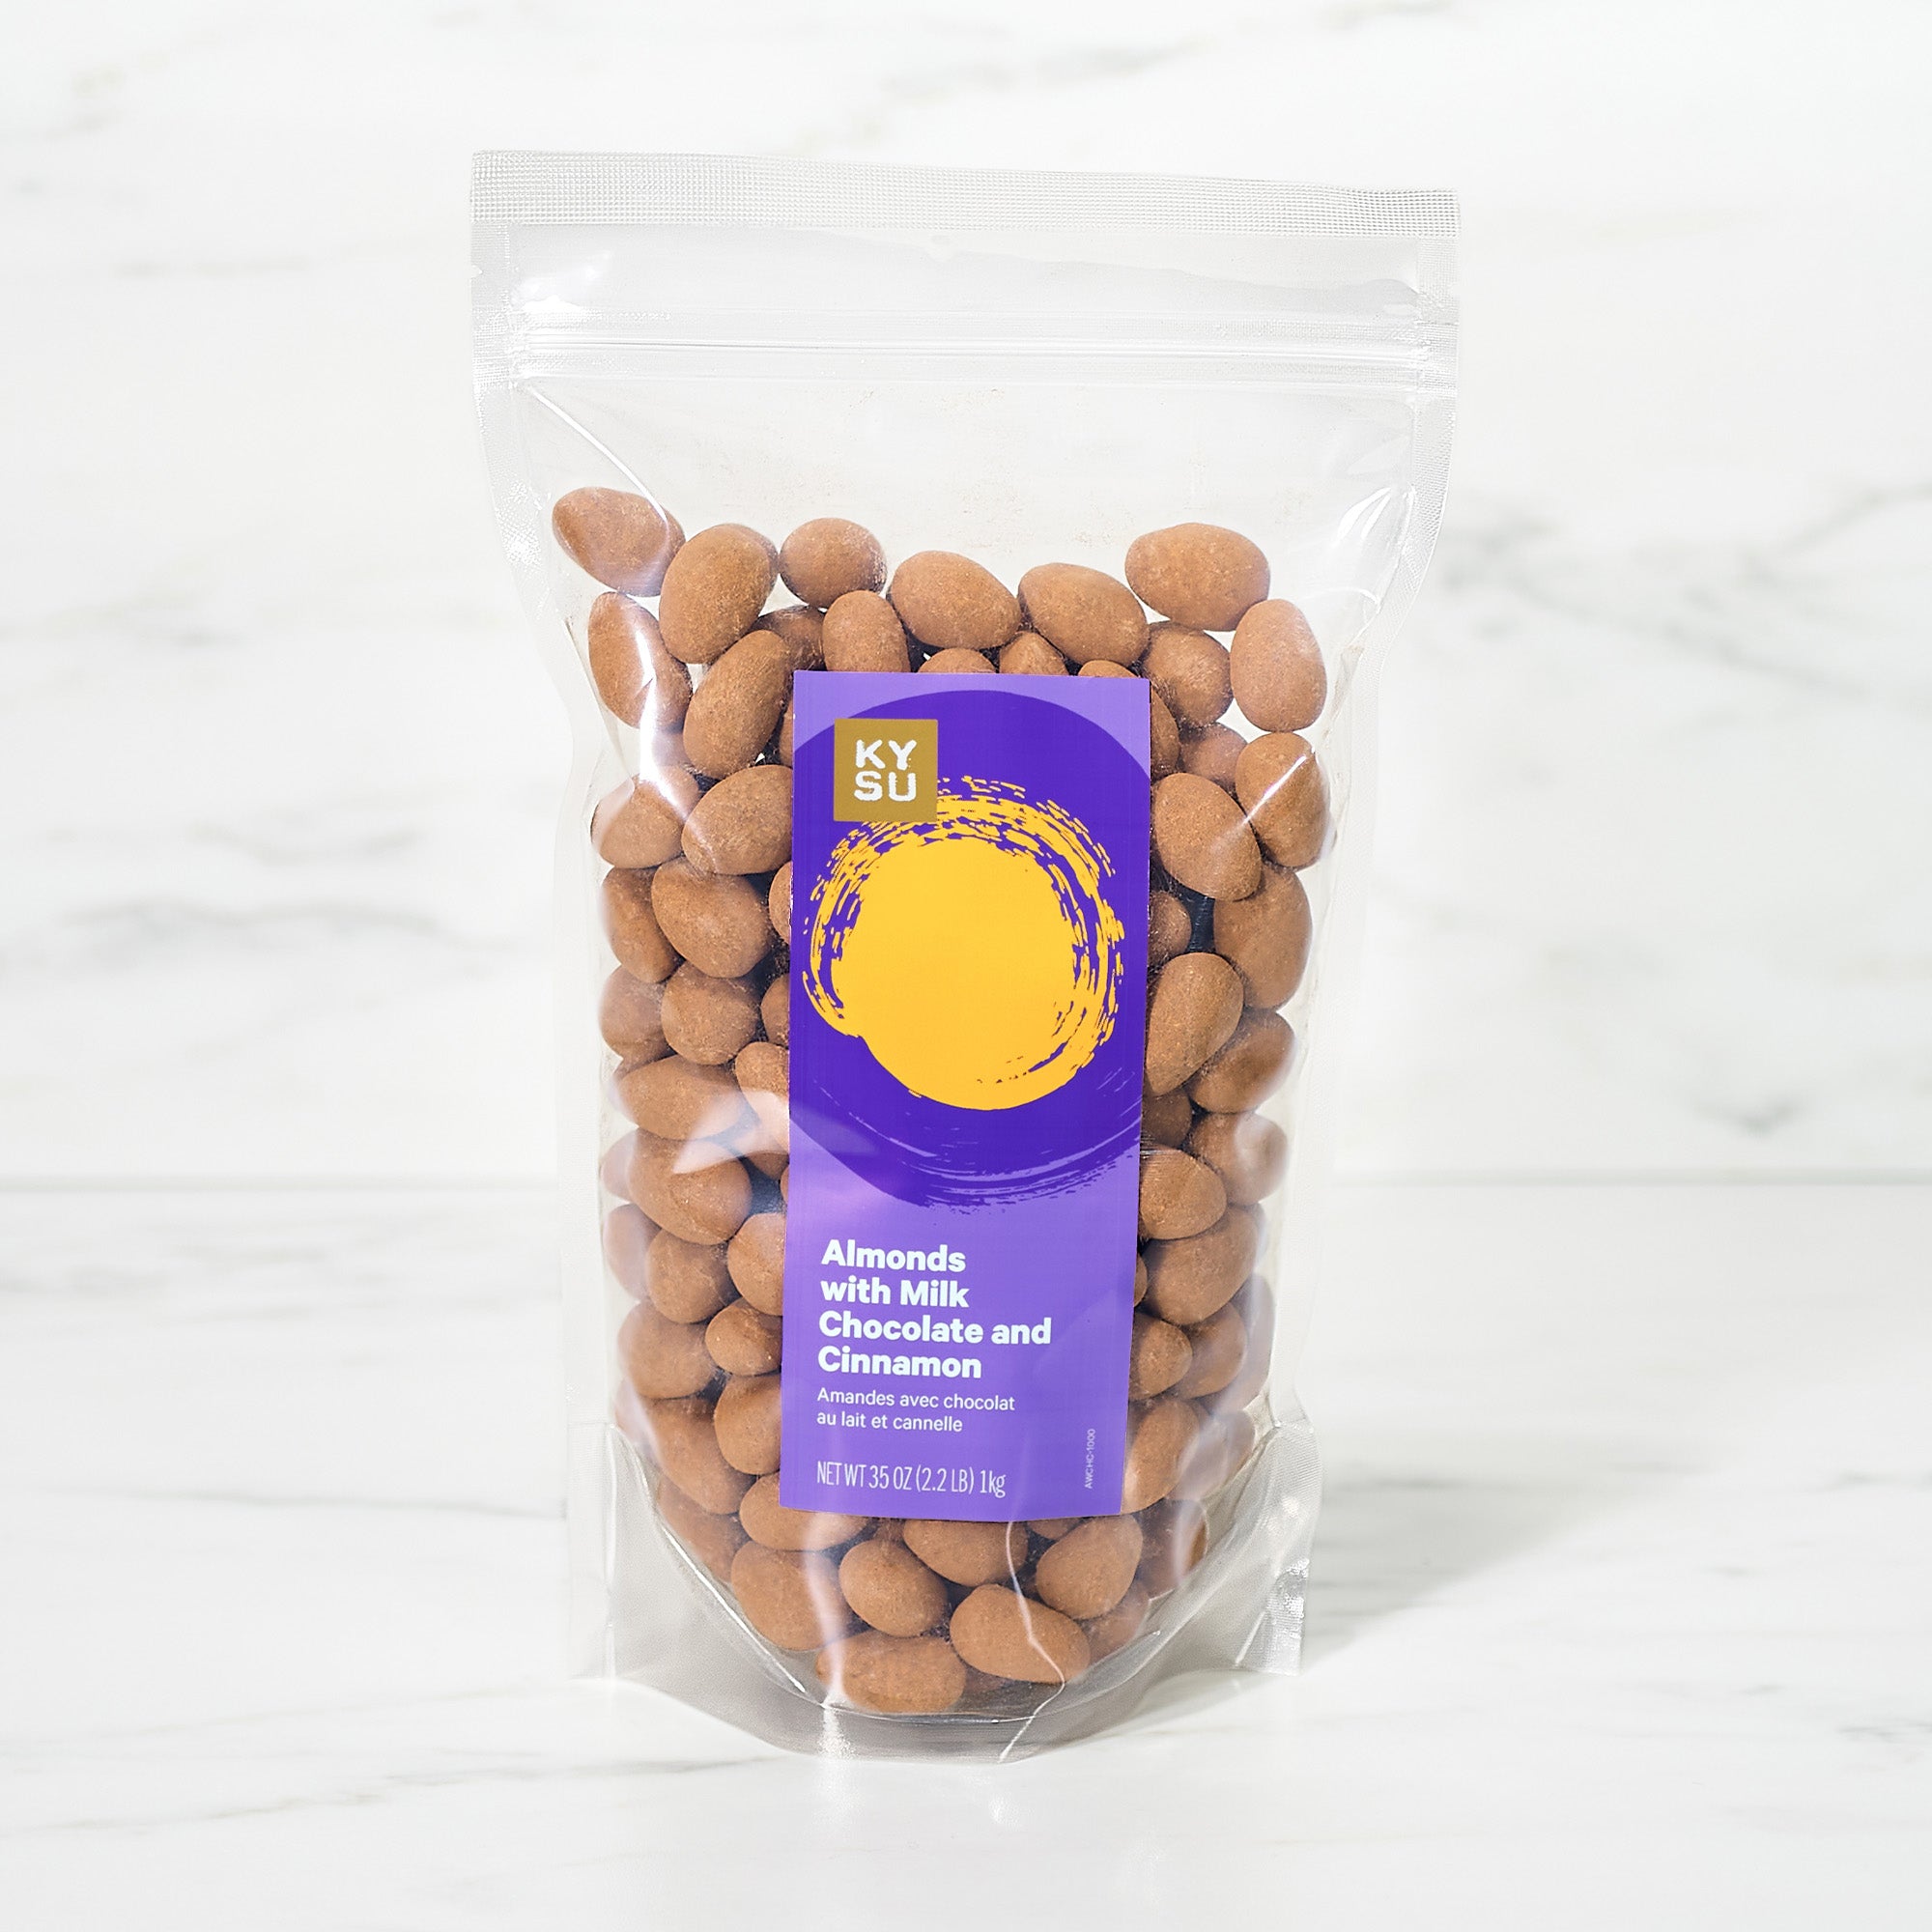 Almonds with chocolate and cinnamon, 1 kg